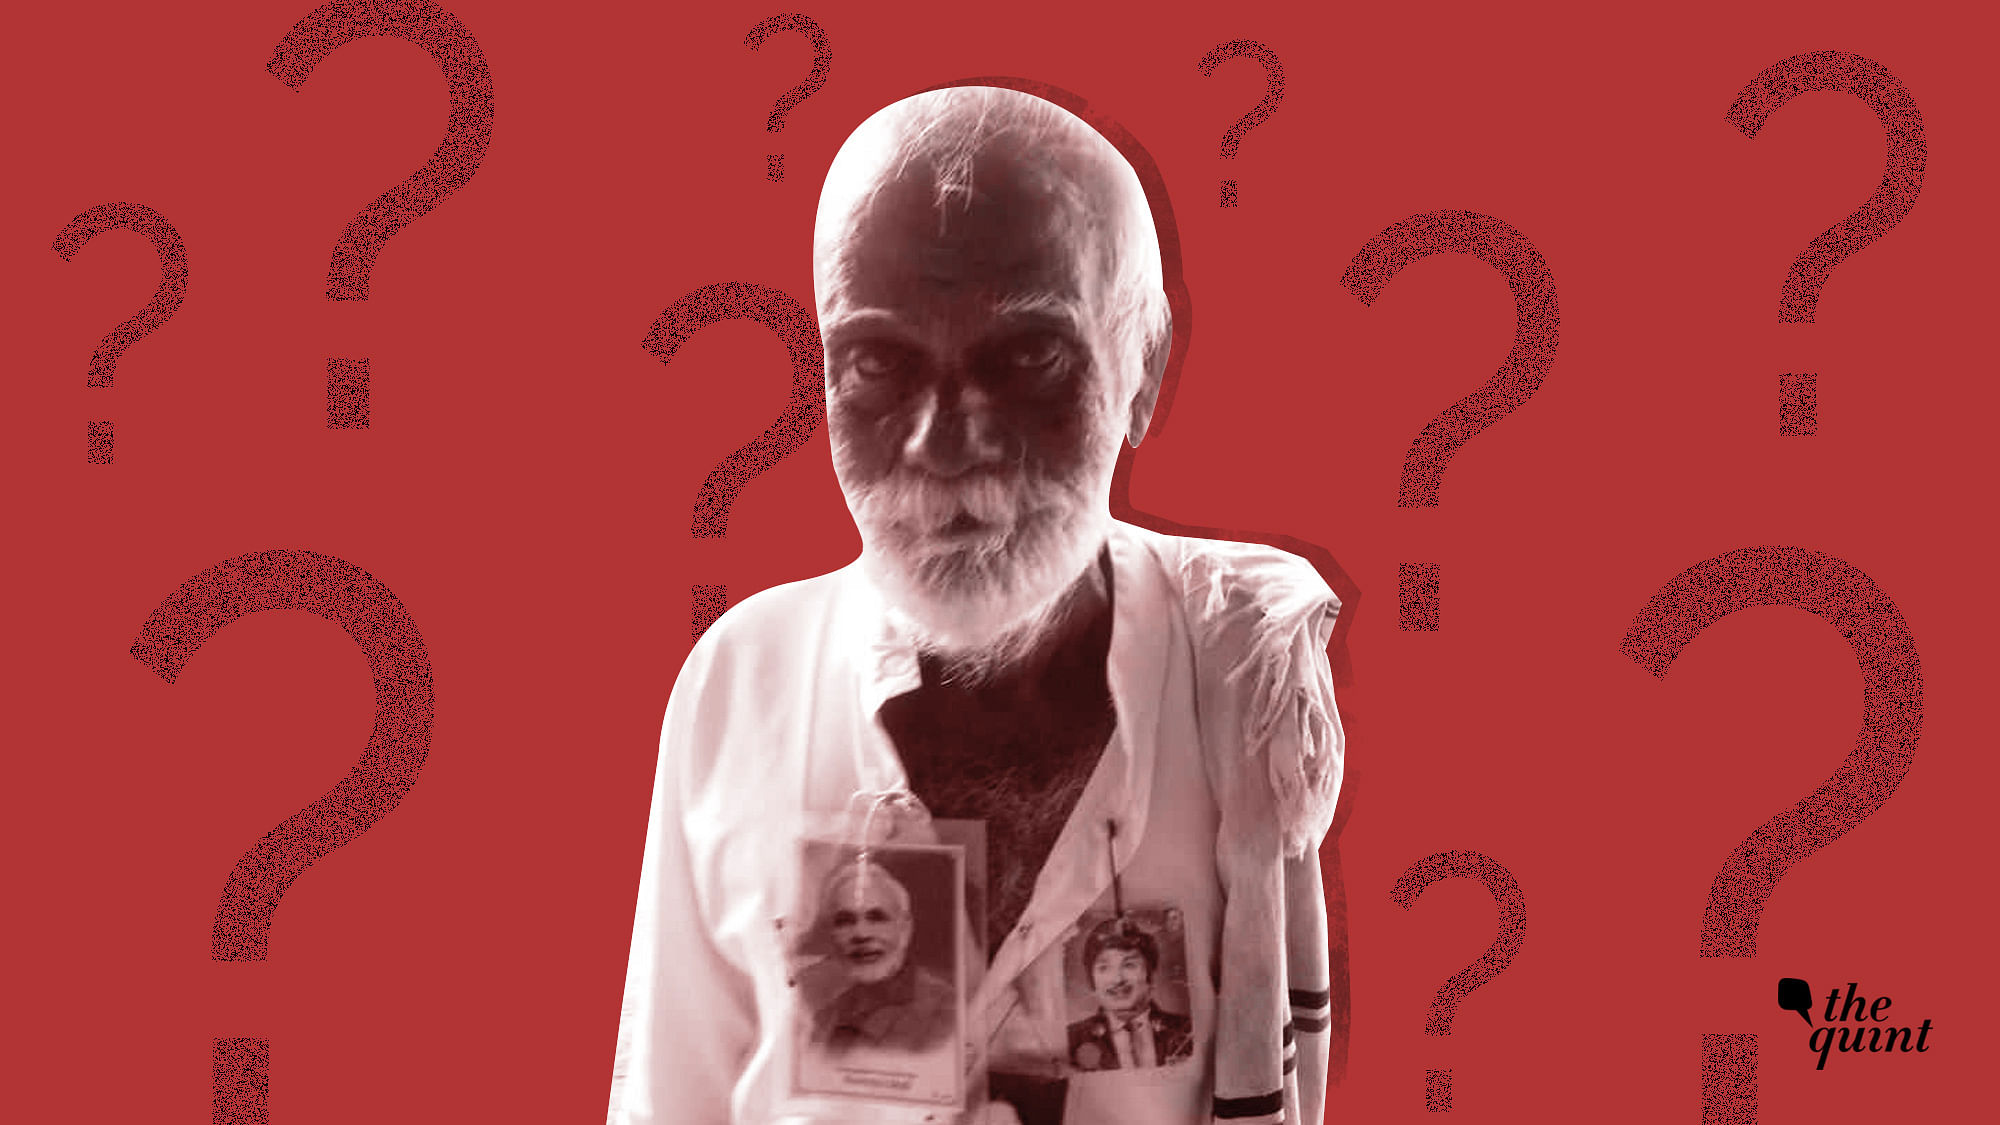 According to PTI, Govindarajan, the 75-year-old man, was attacked by a “suspected supporter” of the DMK-Congress alliance for supporting PM Modi.